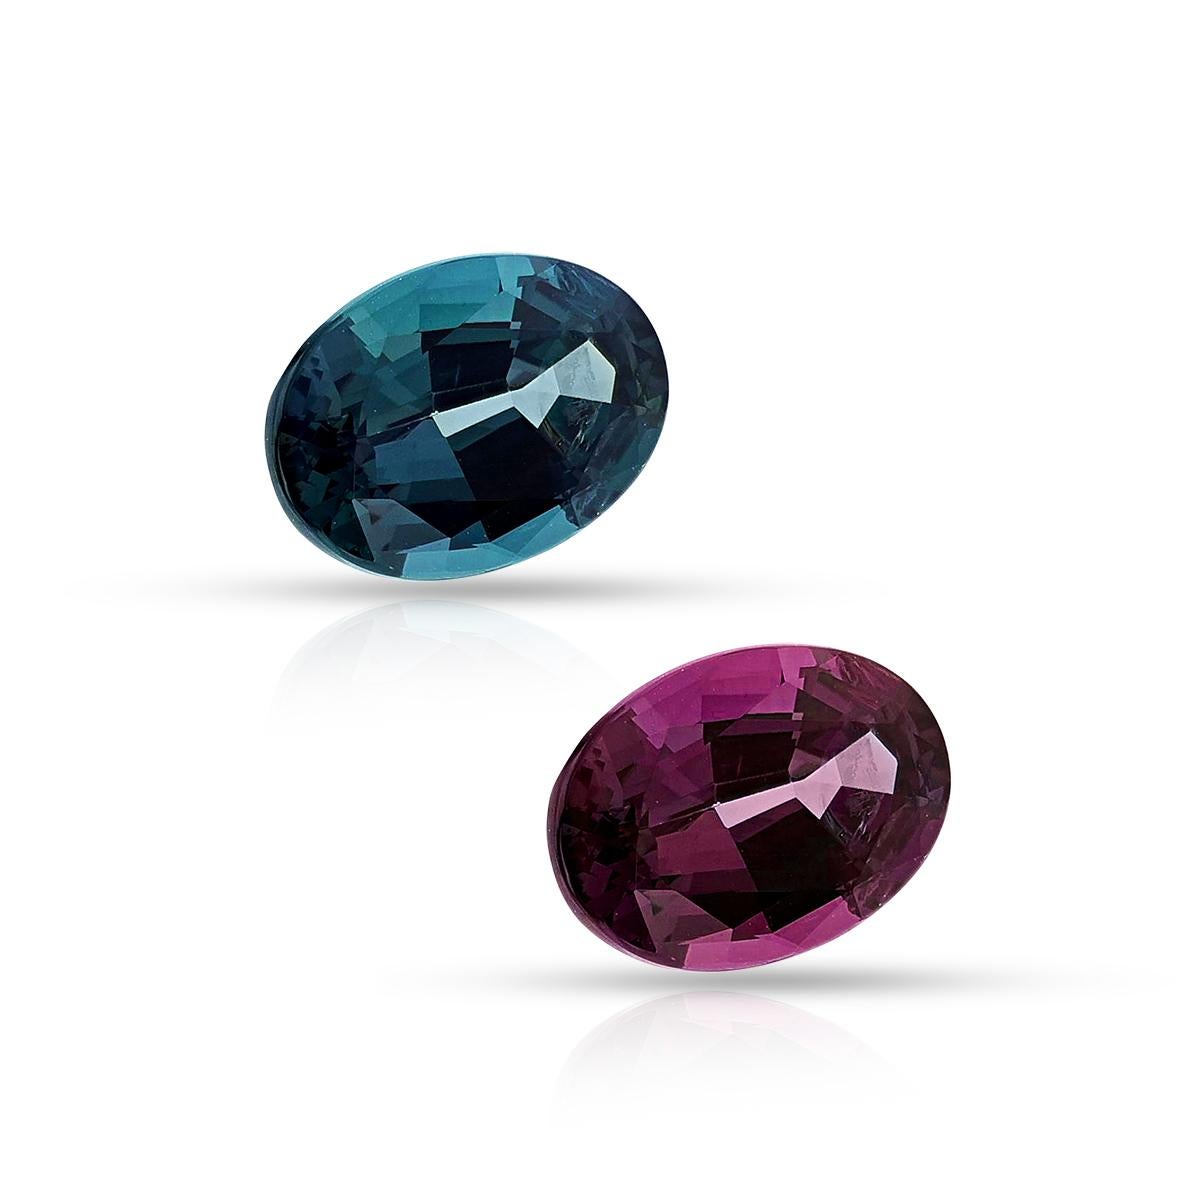 A beautiful and fine-quality oval-shaped mixed-cut Brazilian Alexandrite with 90%-100% (Prominent) Color-Change and Excellent Quality of Color-Change from Blue-Green to Purple-Pink colors. The alexandrite measures 9.72 x 6.85 x 4.67 mm, and it is